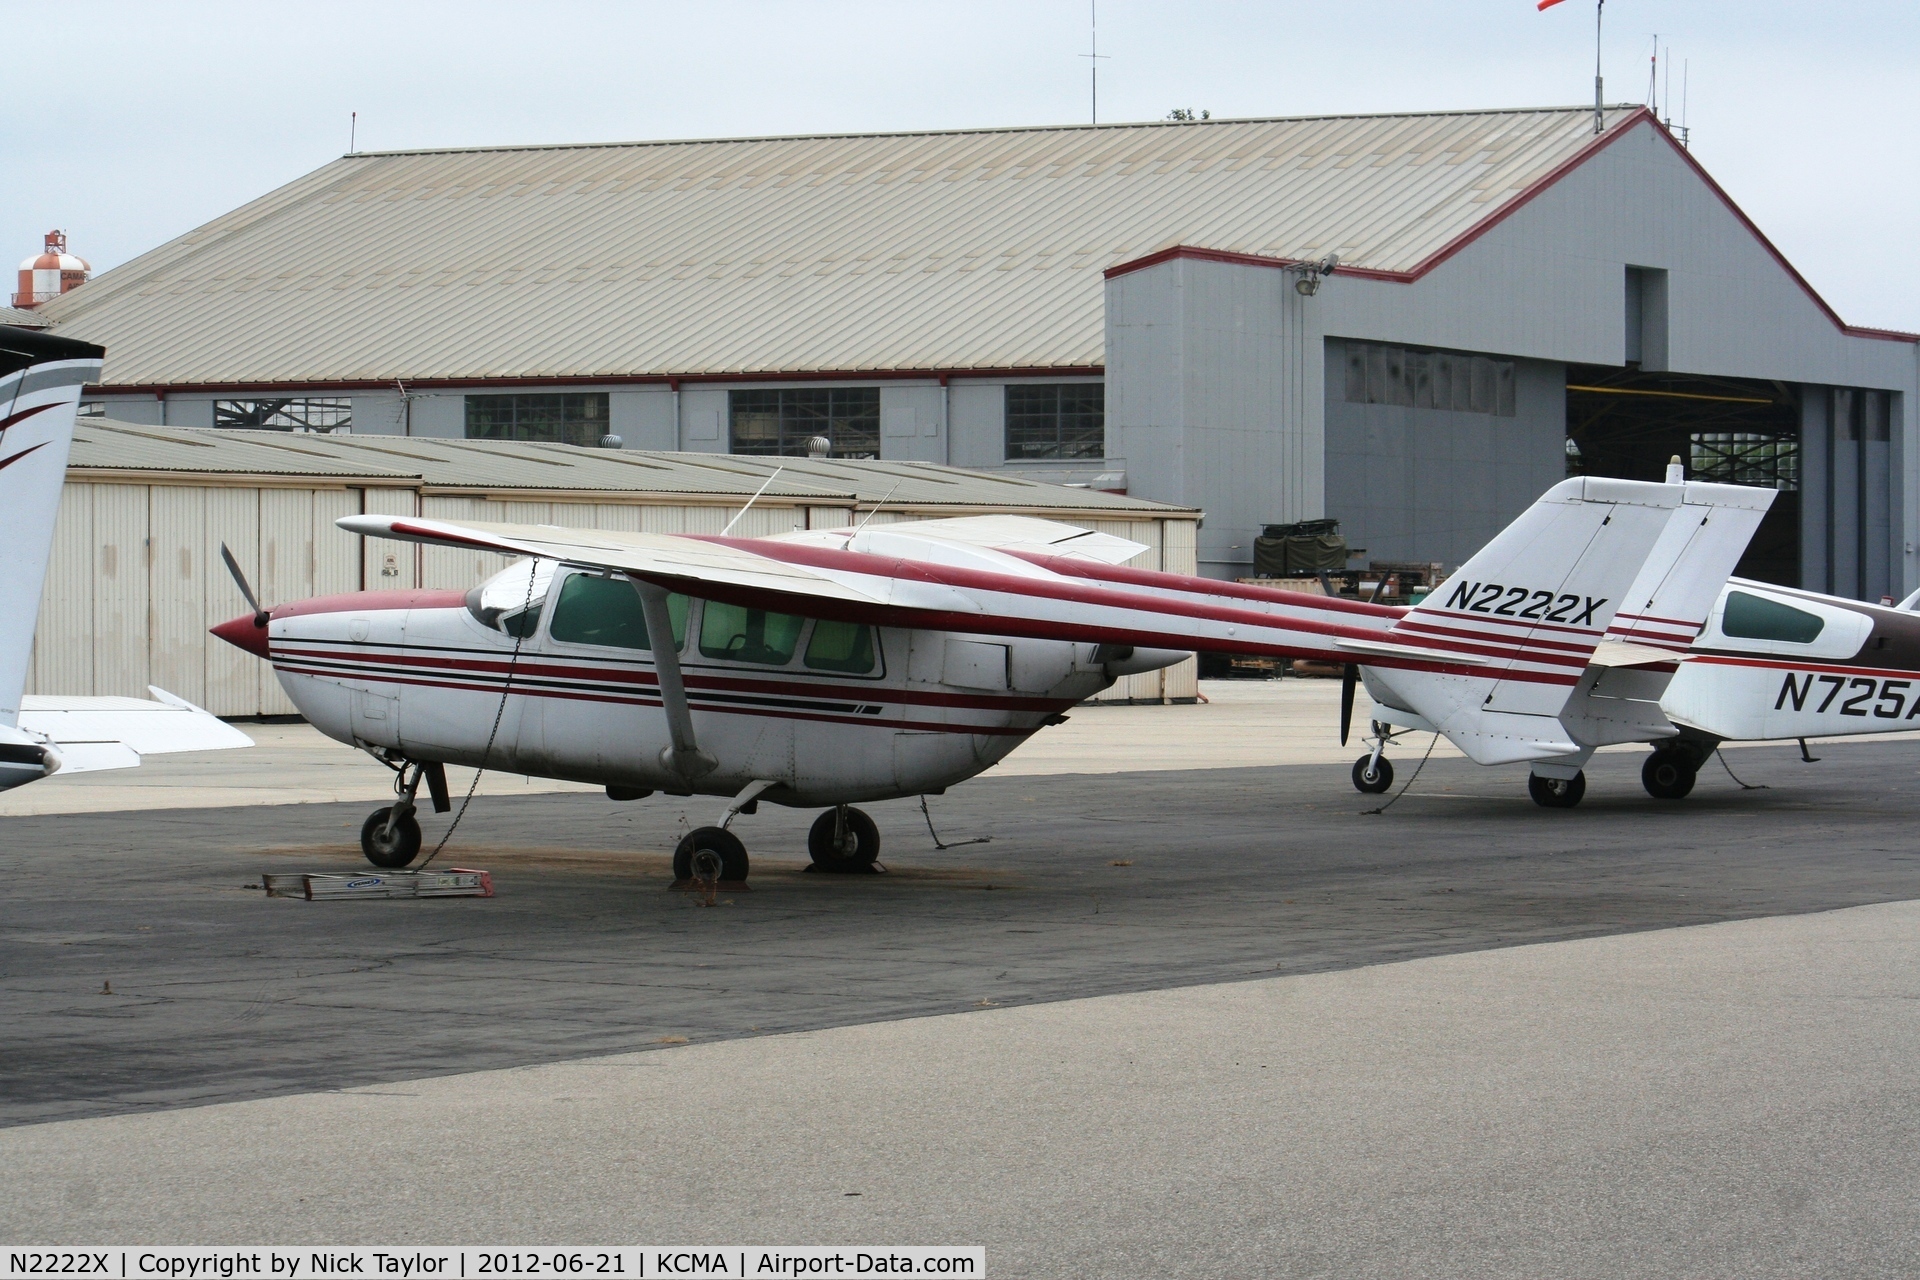 N2222X, 1965 Cessna 337 Super Skymaster C/N 337-0122, Parked by the wash rack